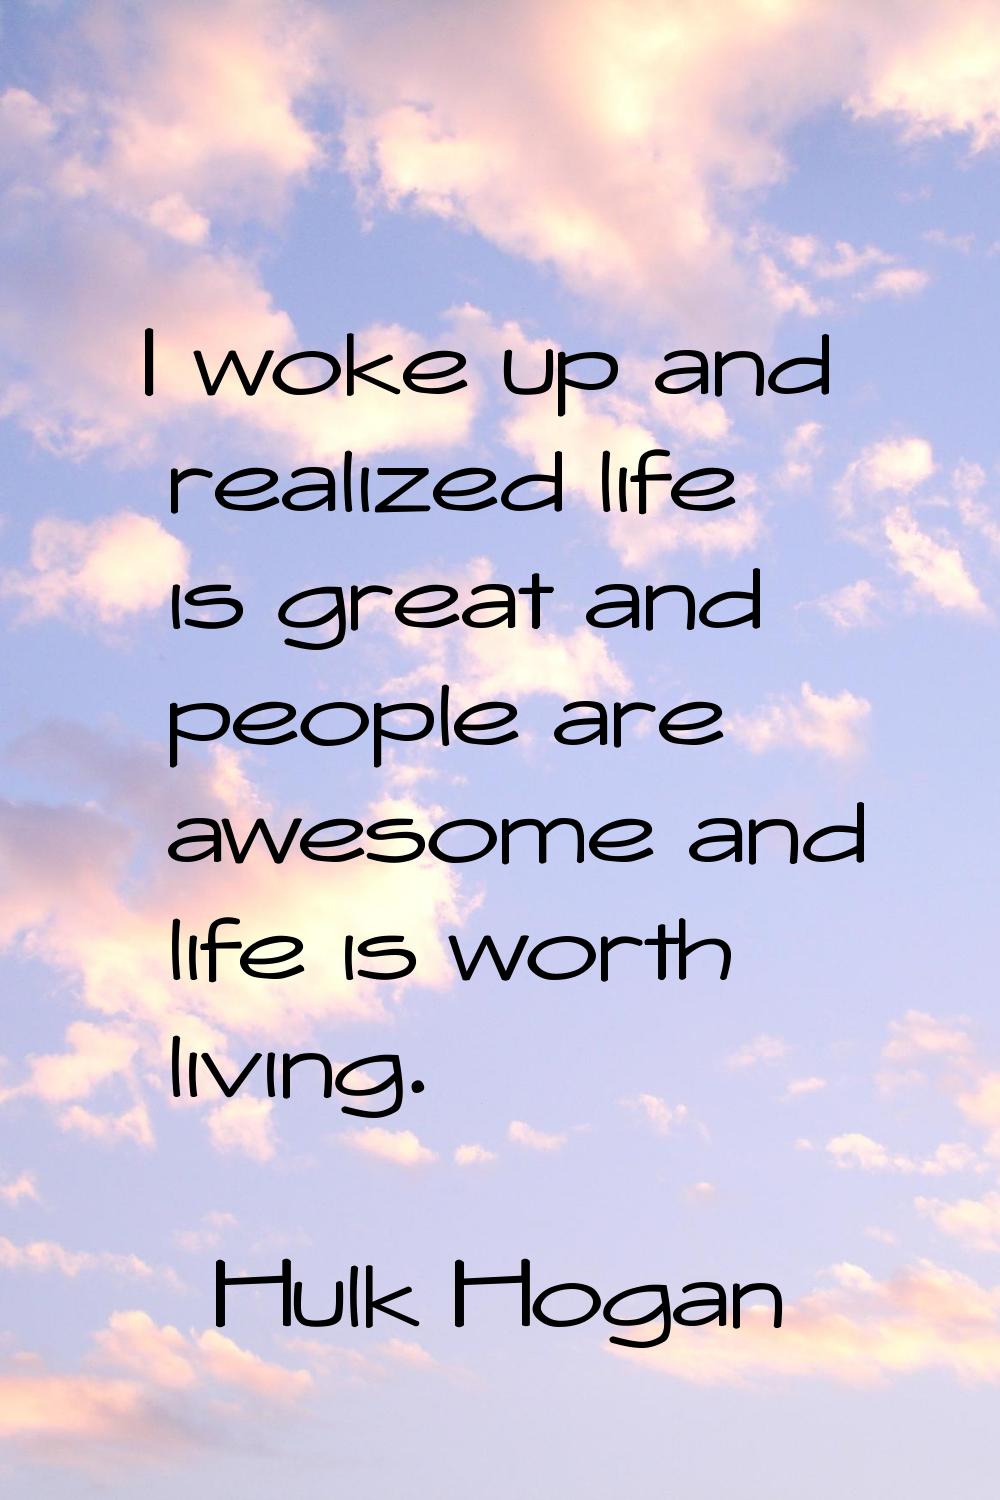 I woke up and realized life is great and people are awesome and life is worth living.